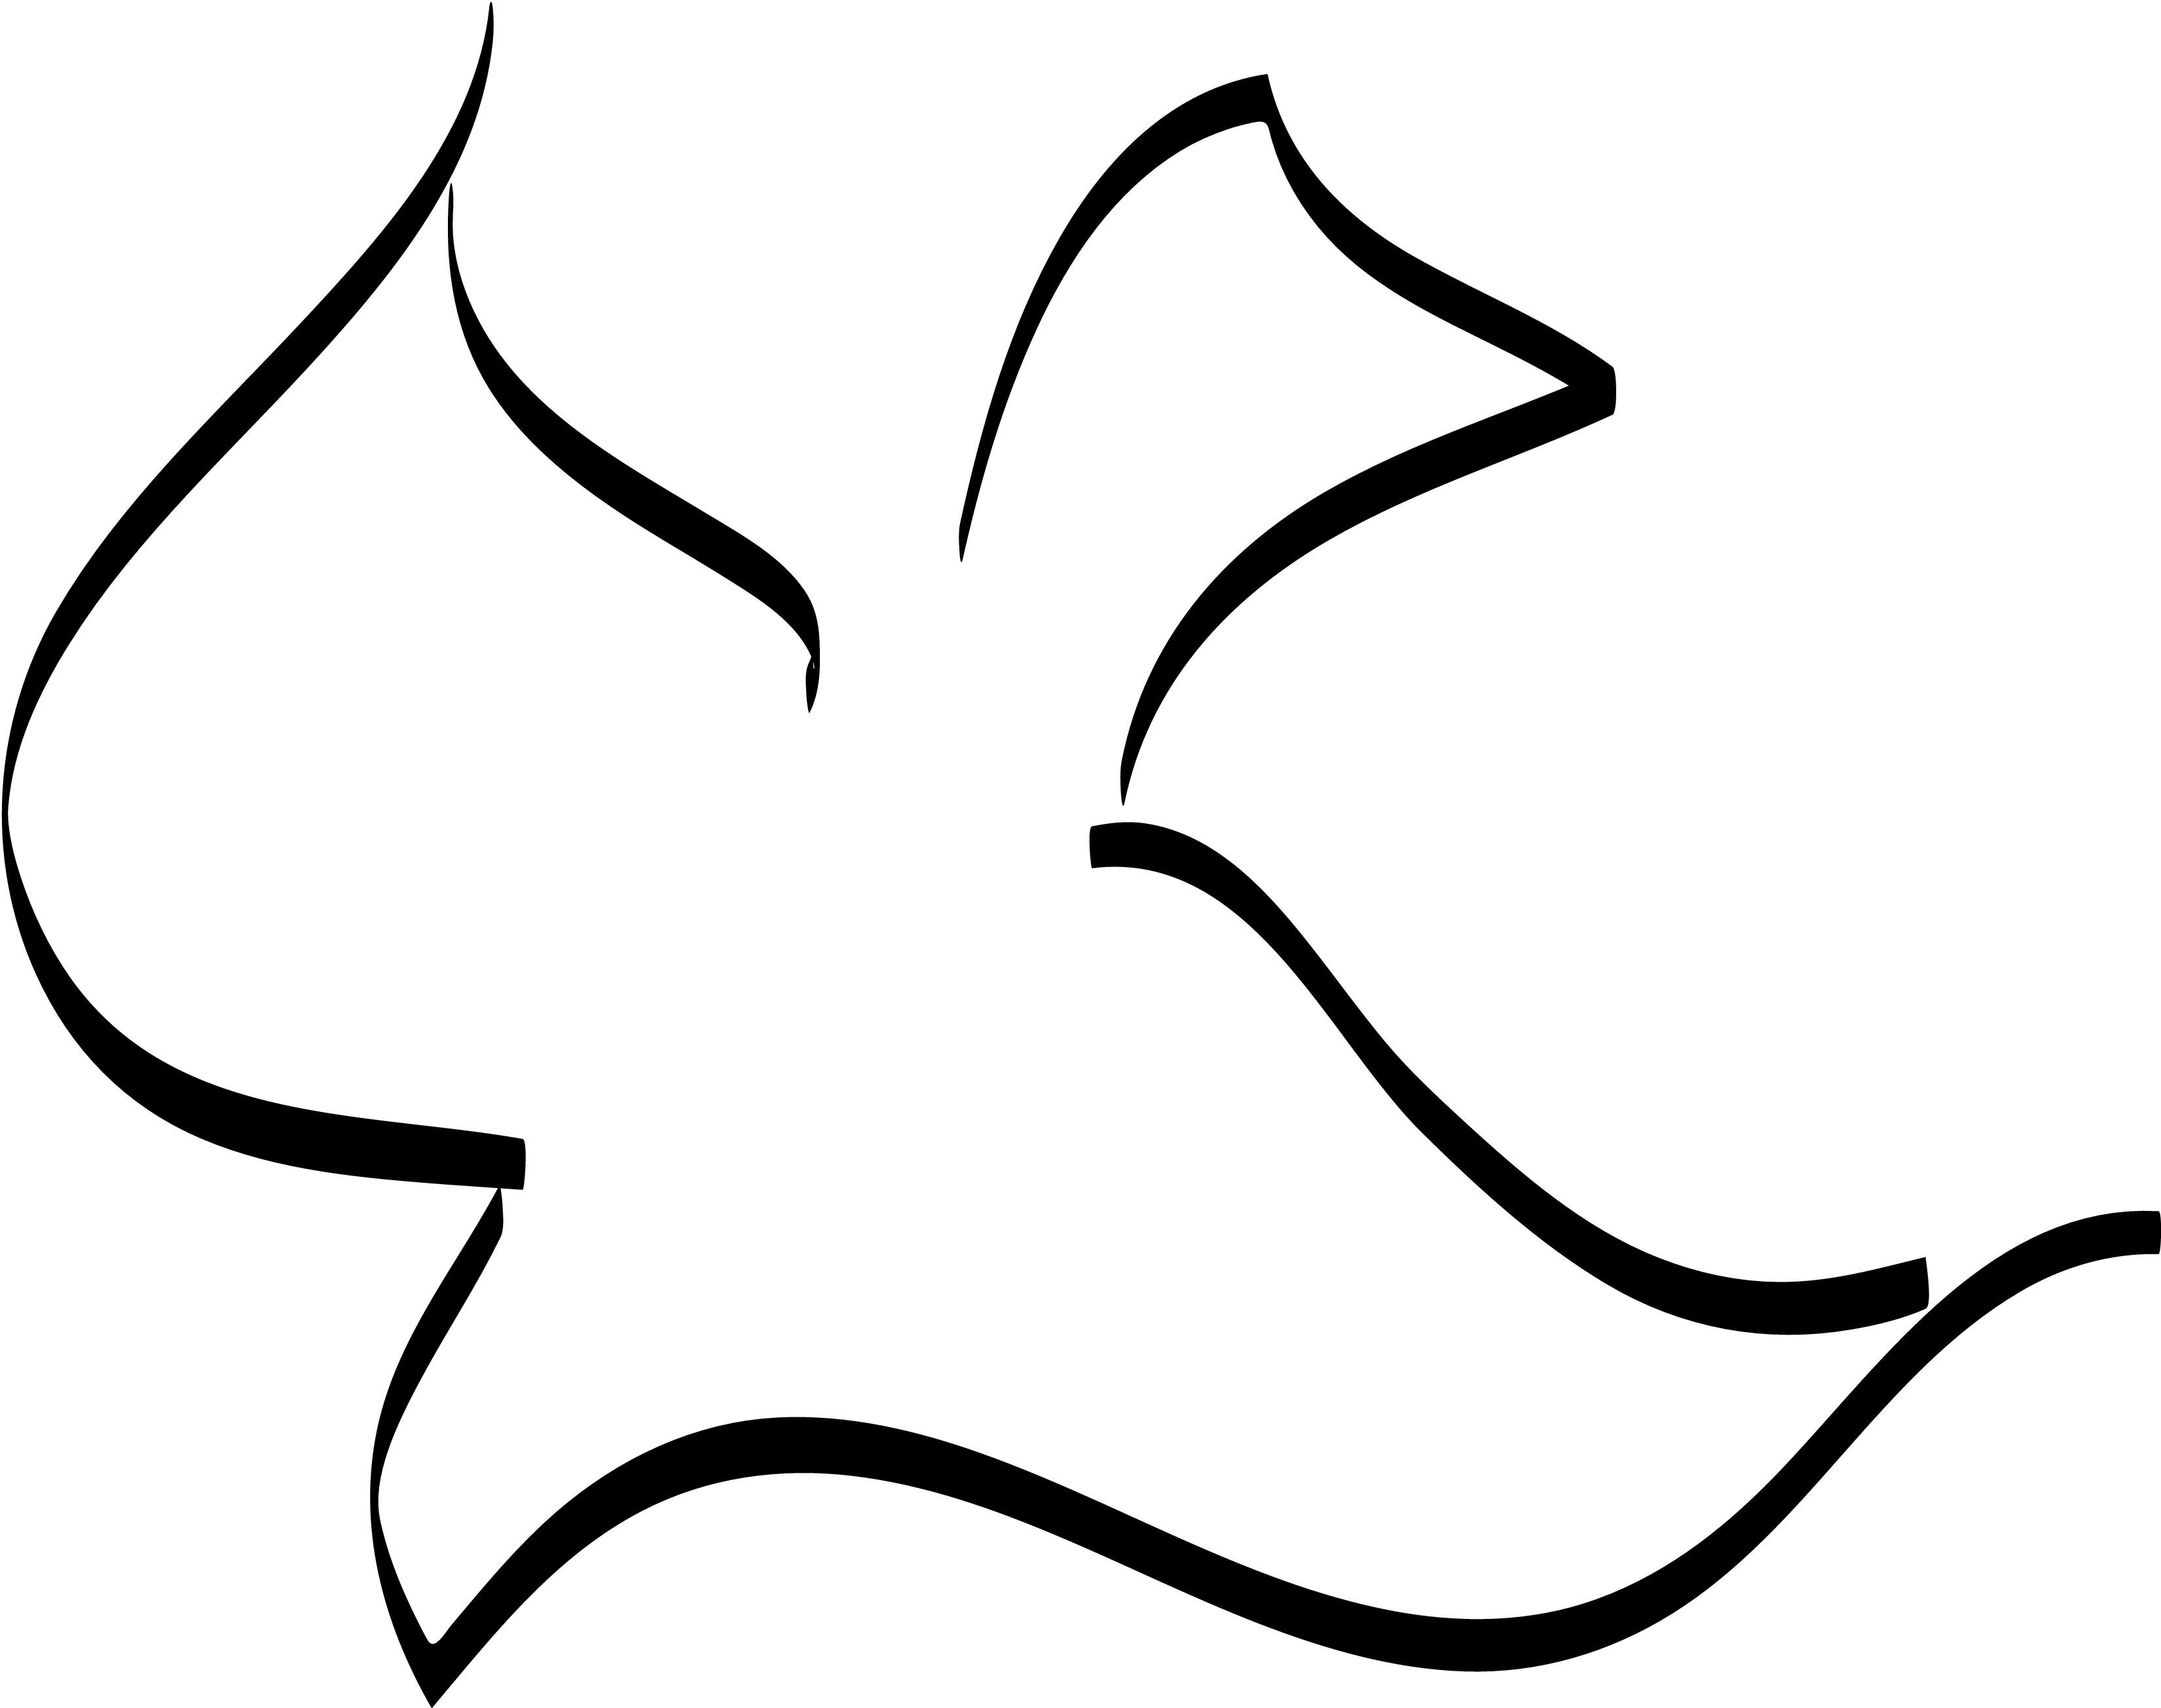 Dove Of The Holy Spirit - ClipArt Best